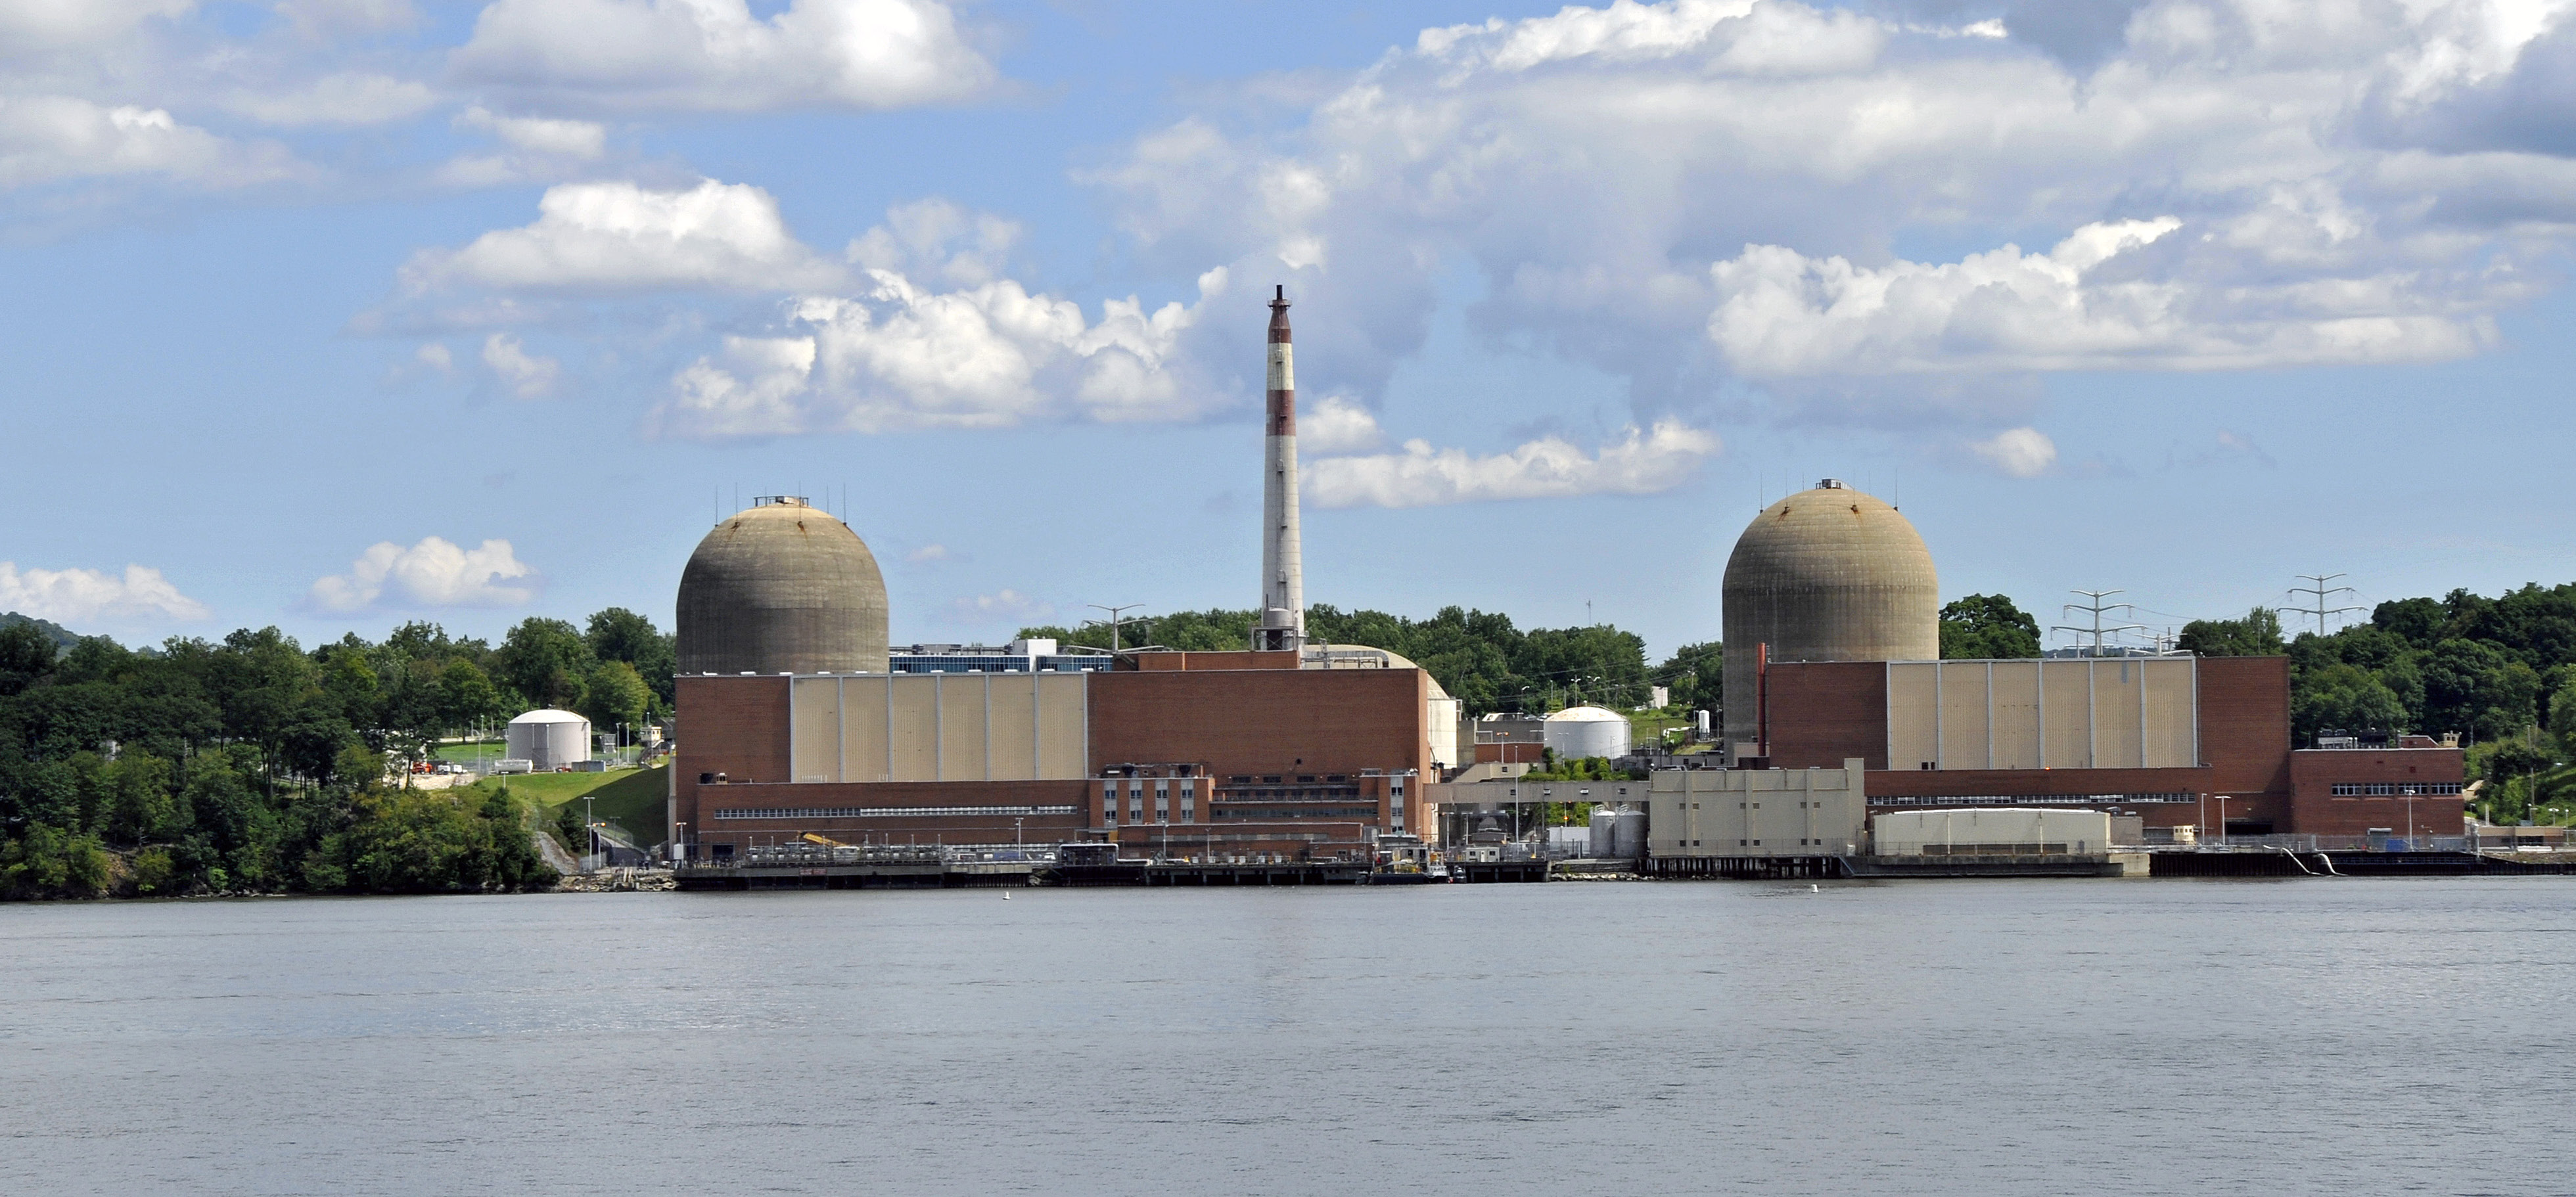 New York's Indian Point reactors. Photo from wikipedia.